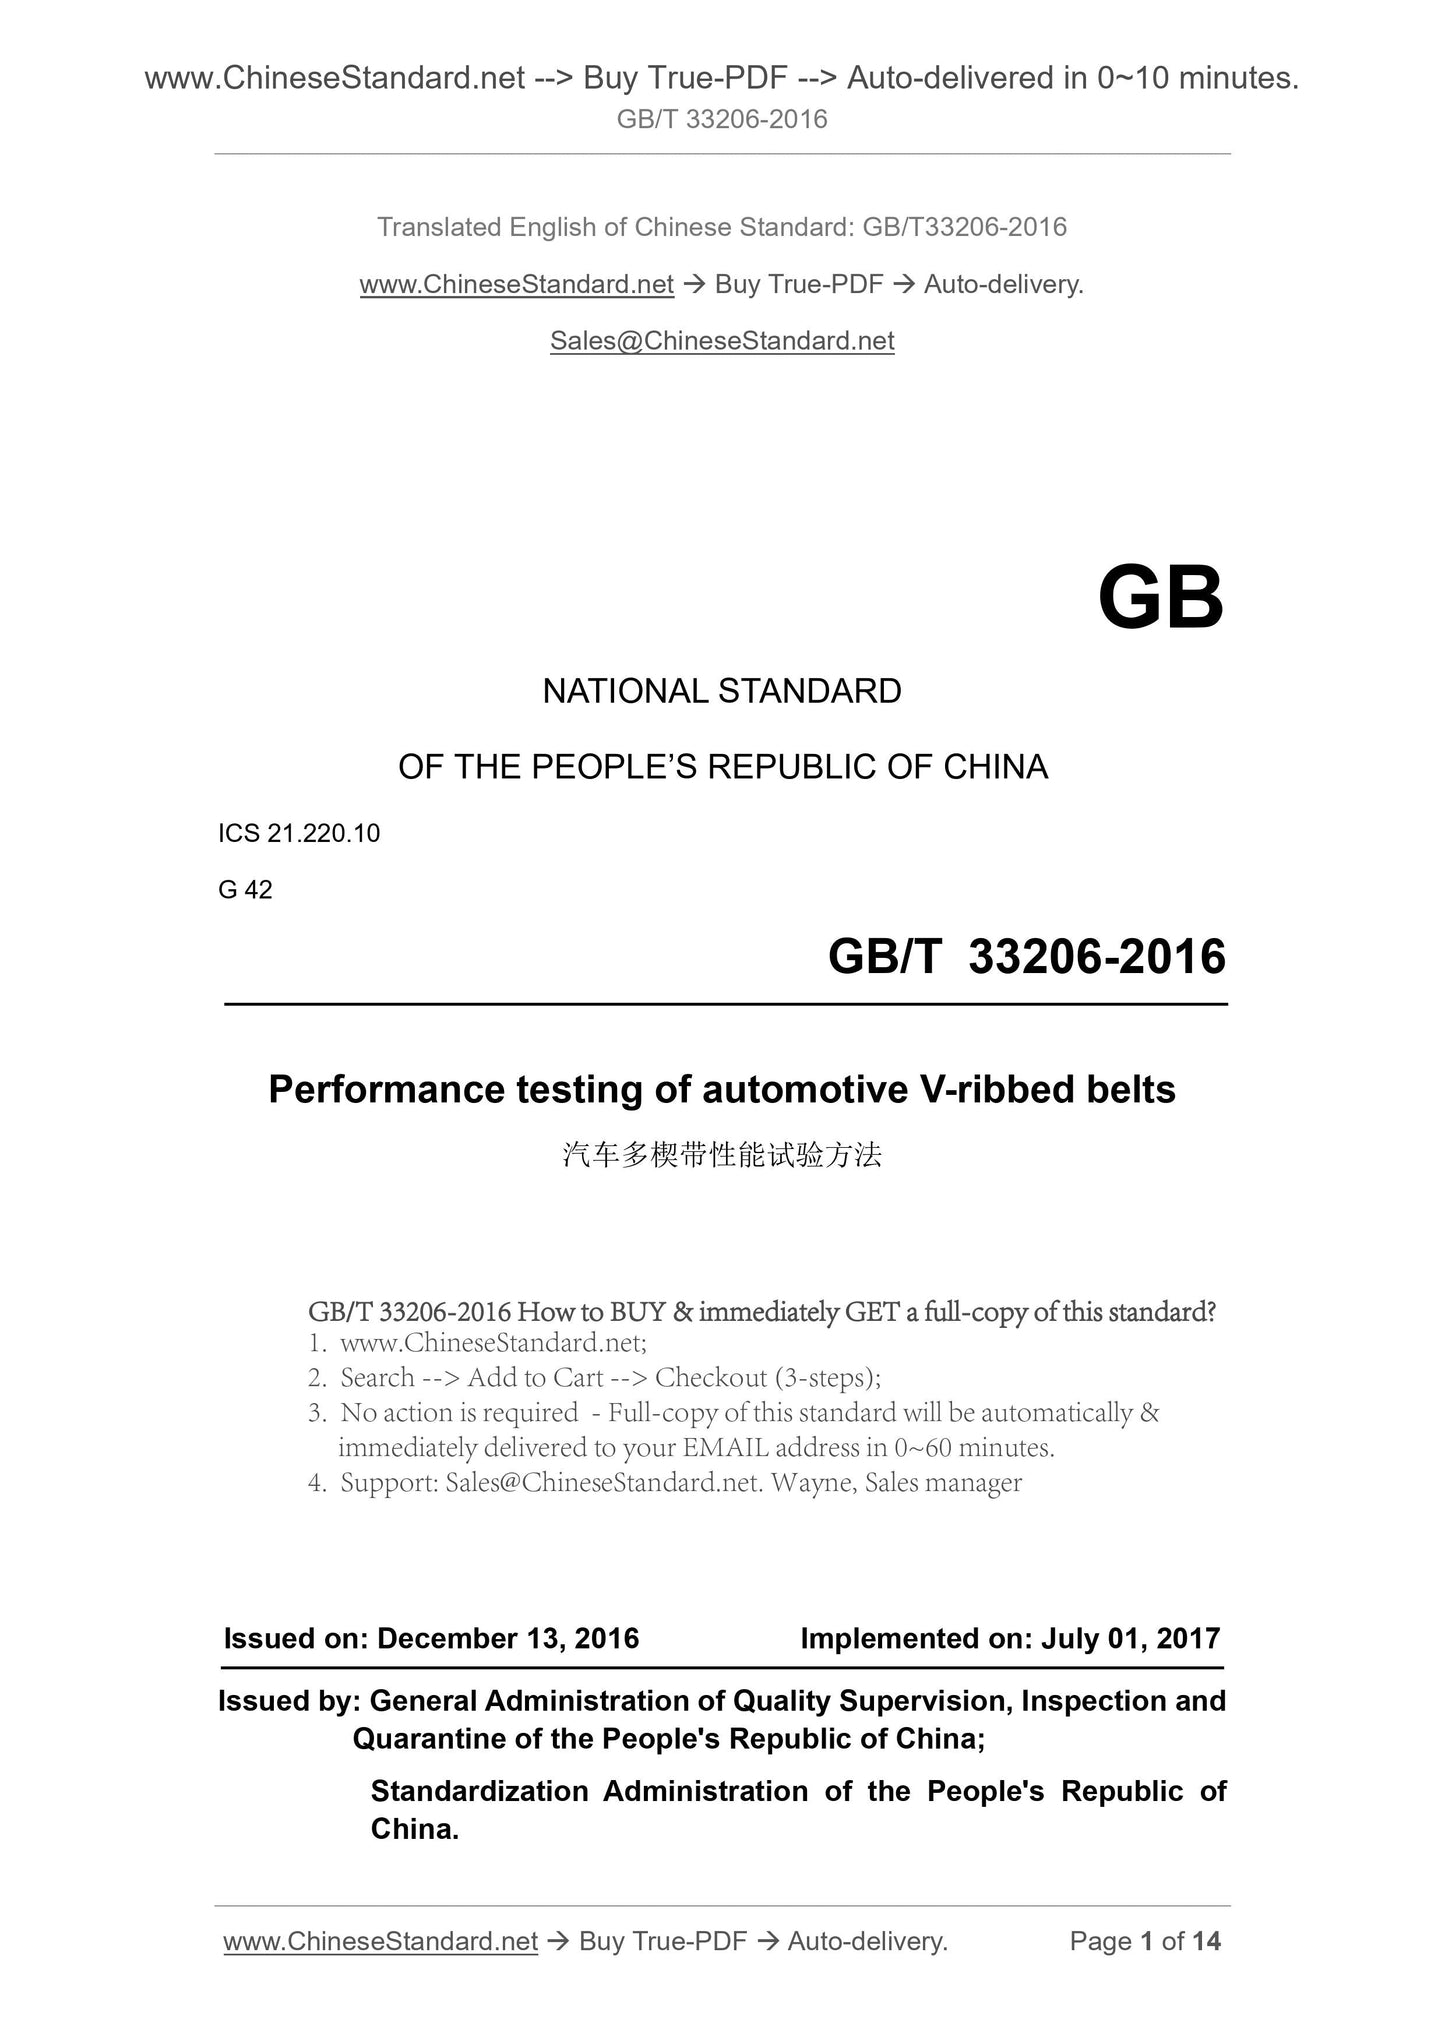 GB/T 33206-2016 Page 1